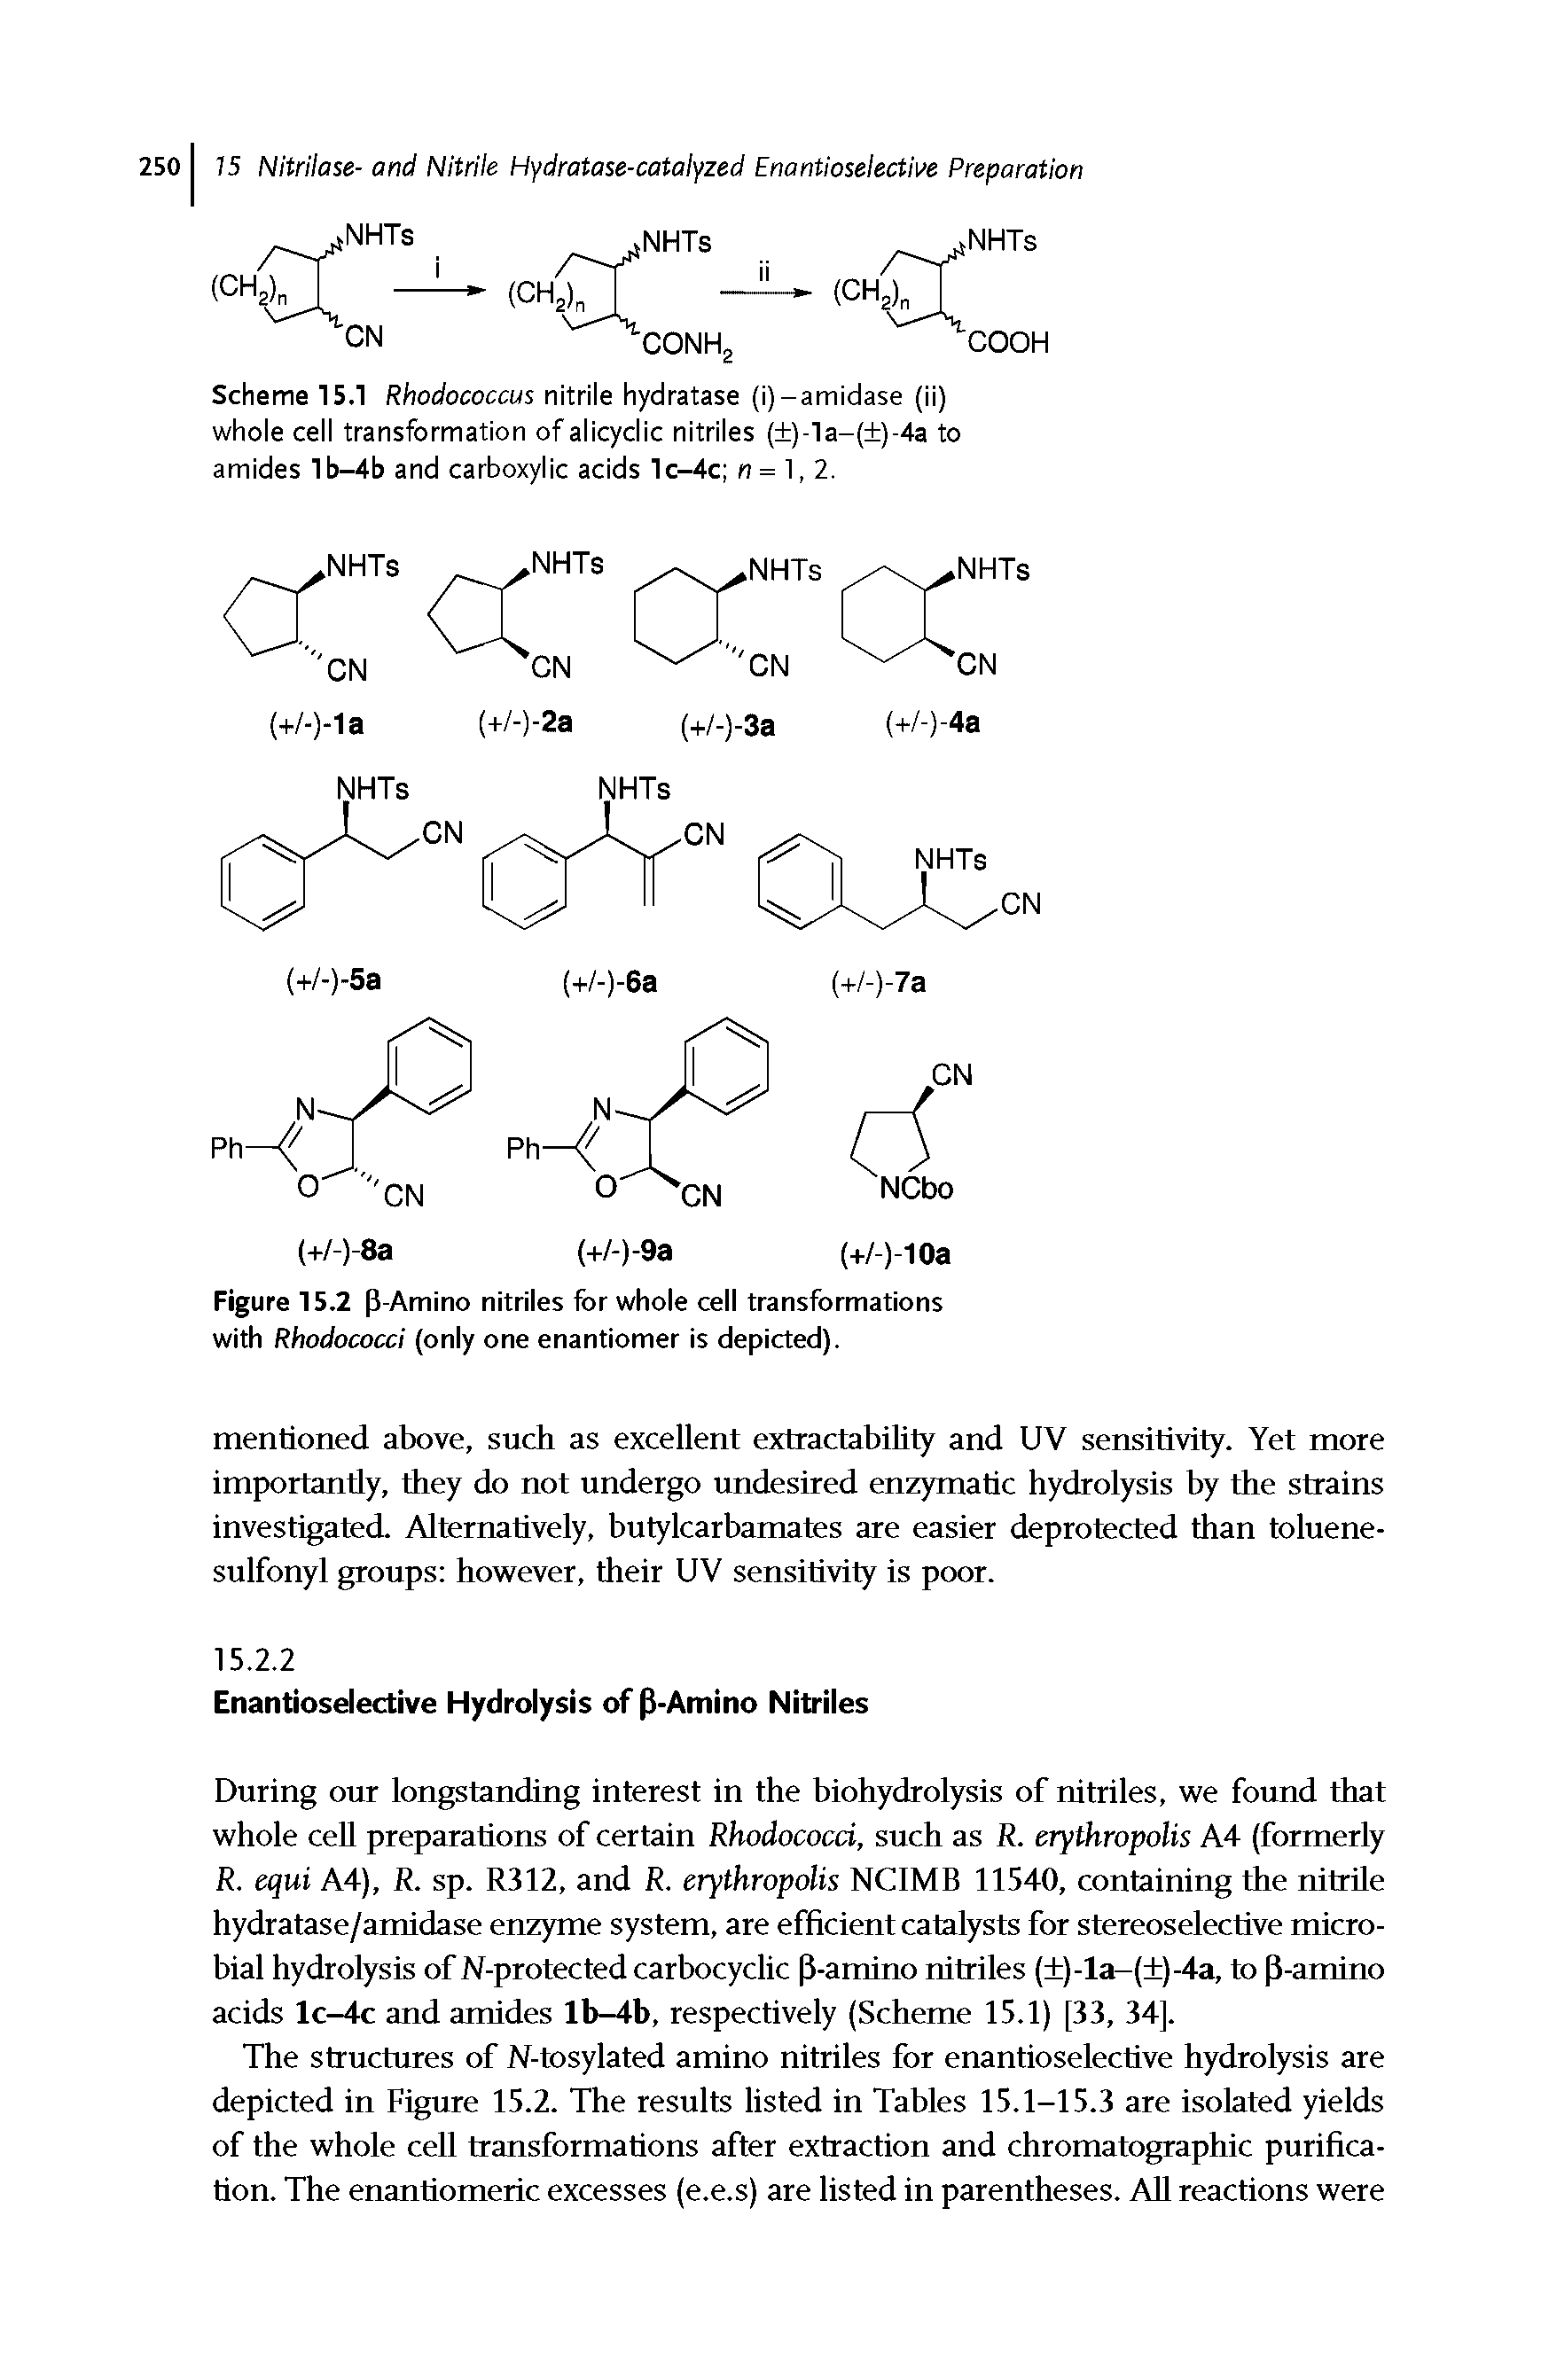 Scheme 15.1 Rhodococcus nitrile hydratase (i)-amidase (ii) whole cell transformation of alicyclic nitriles ( )-1a-( )-4a to amides 1b-4b and carboxylic acids 1c-4c n = 1,2.